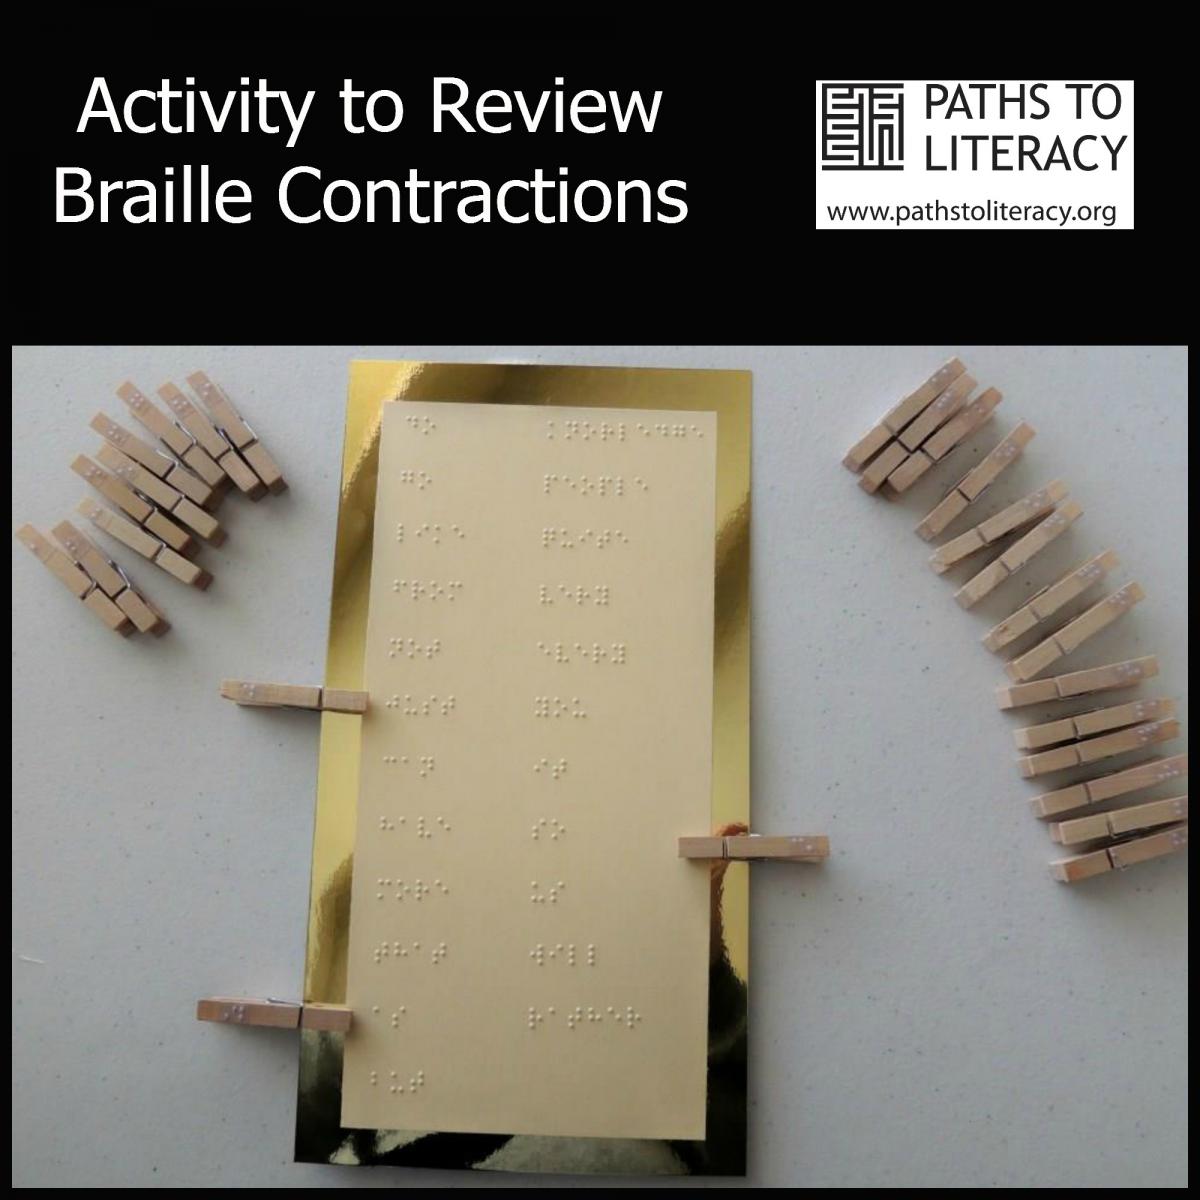 Activity to Review Braille Contractions